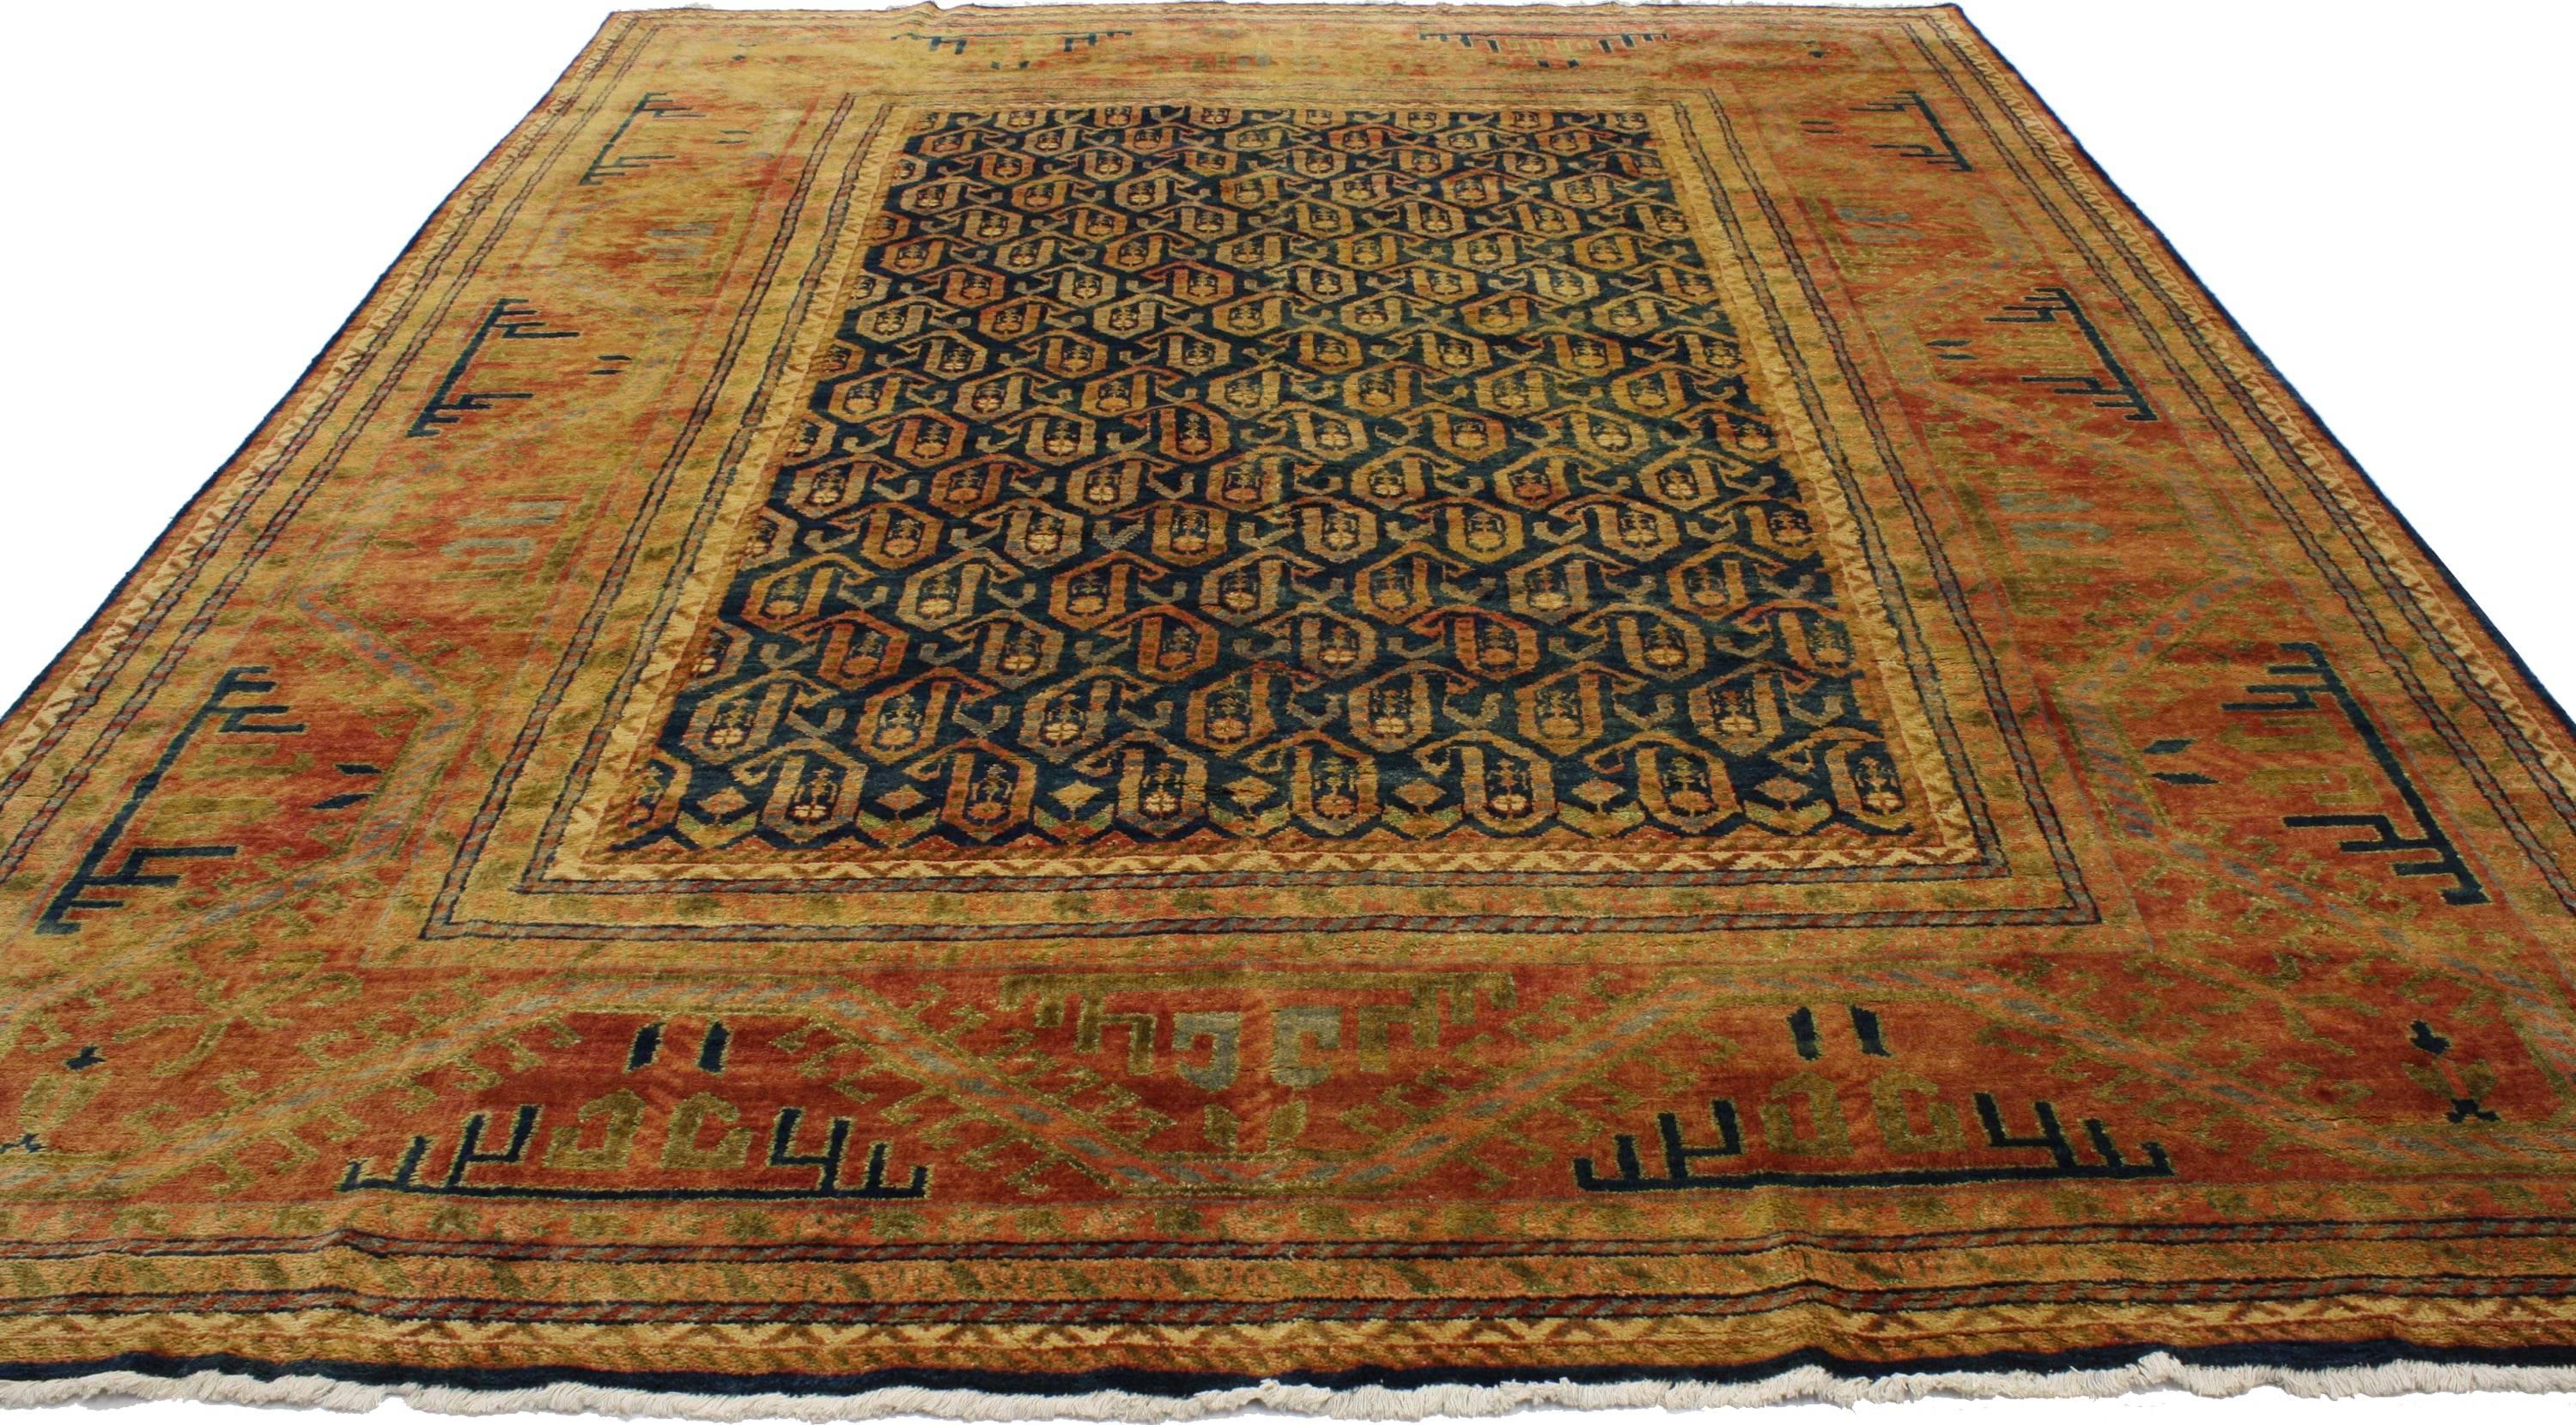 30193, contemporary Caucasian and Kazak style area rug. This hand knotted wool contemporary Caucasian and Kazak style rug features an all-over floral boteh pattern spread across an abrashed ink blue field. The widely used boteh motif is thought to